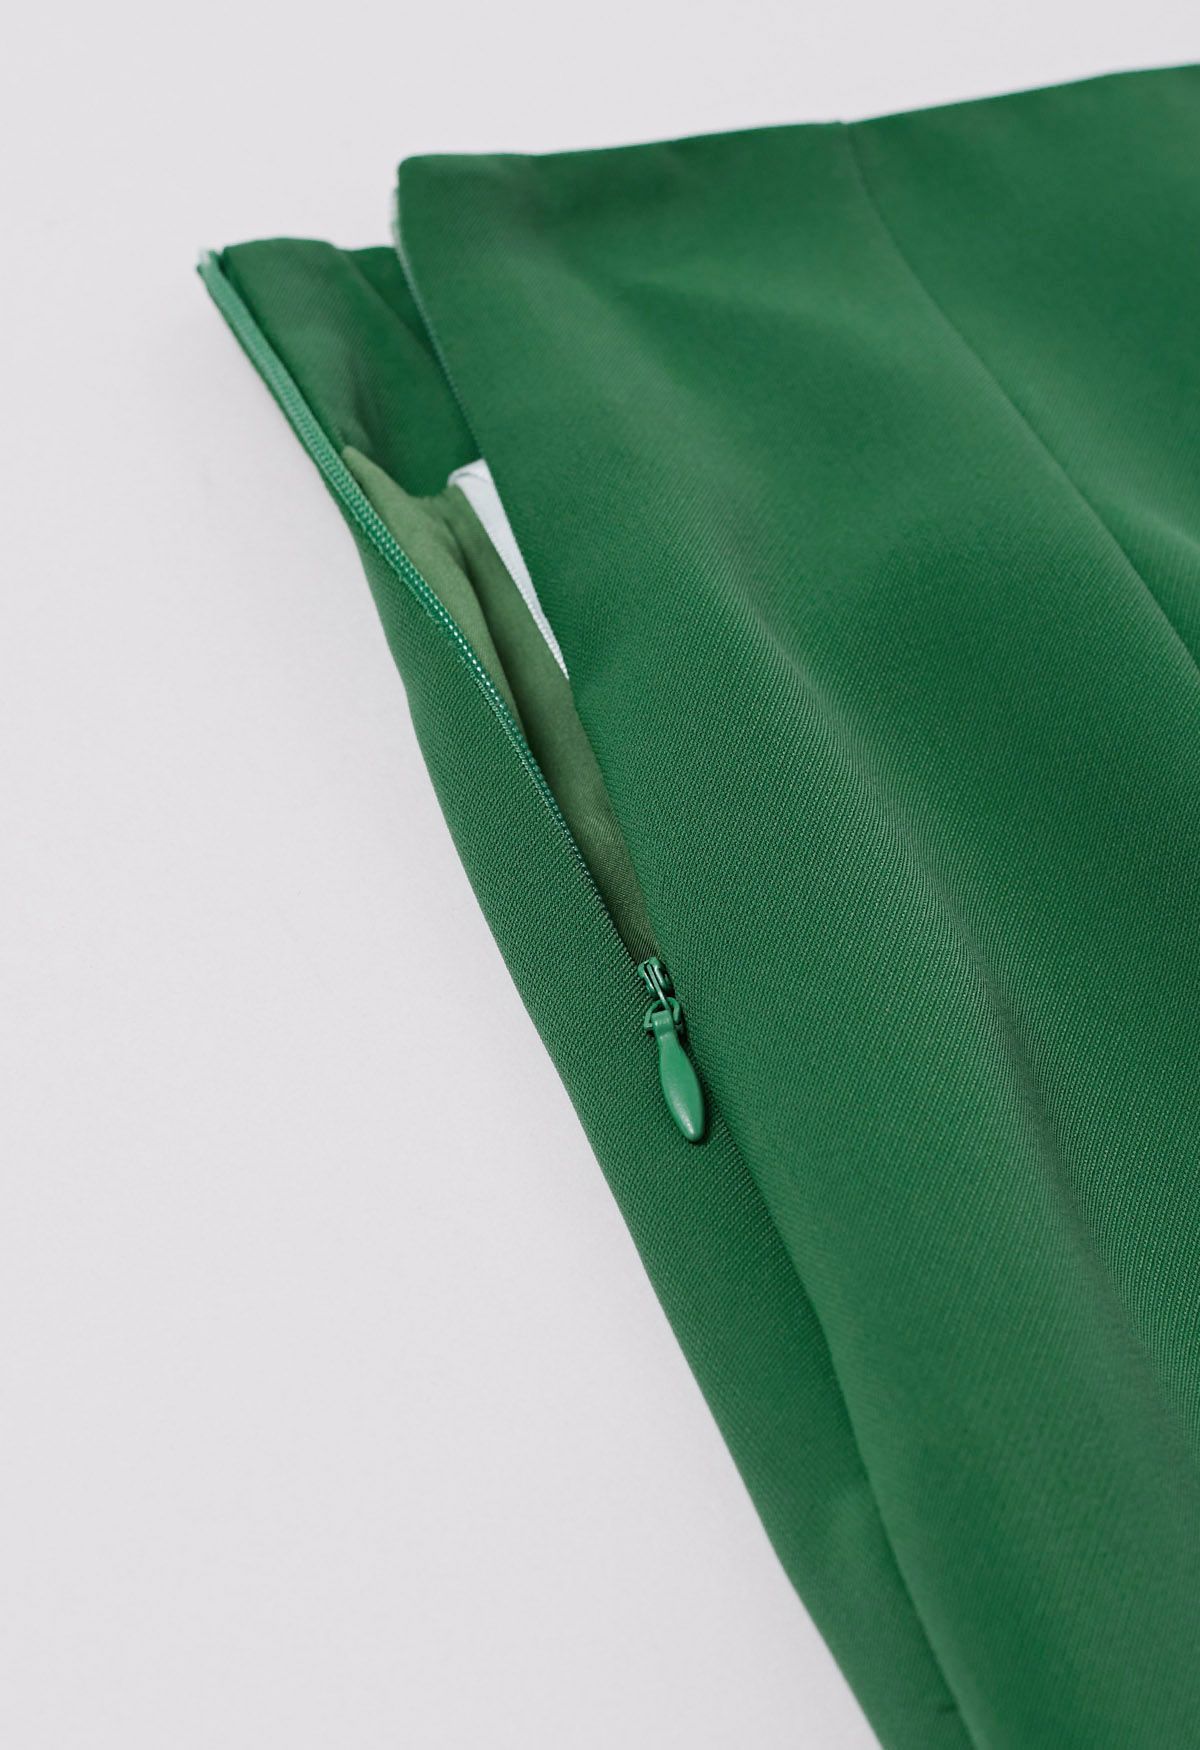 Solid Color Frilling Skirt in Green